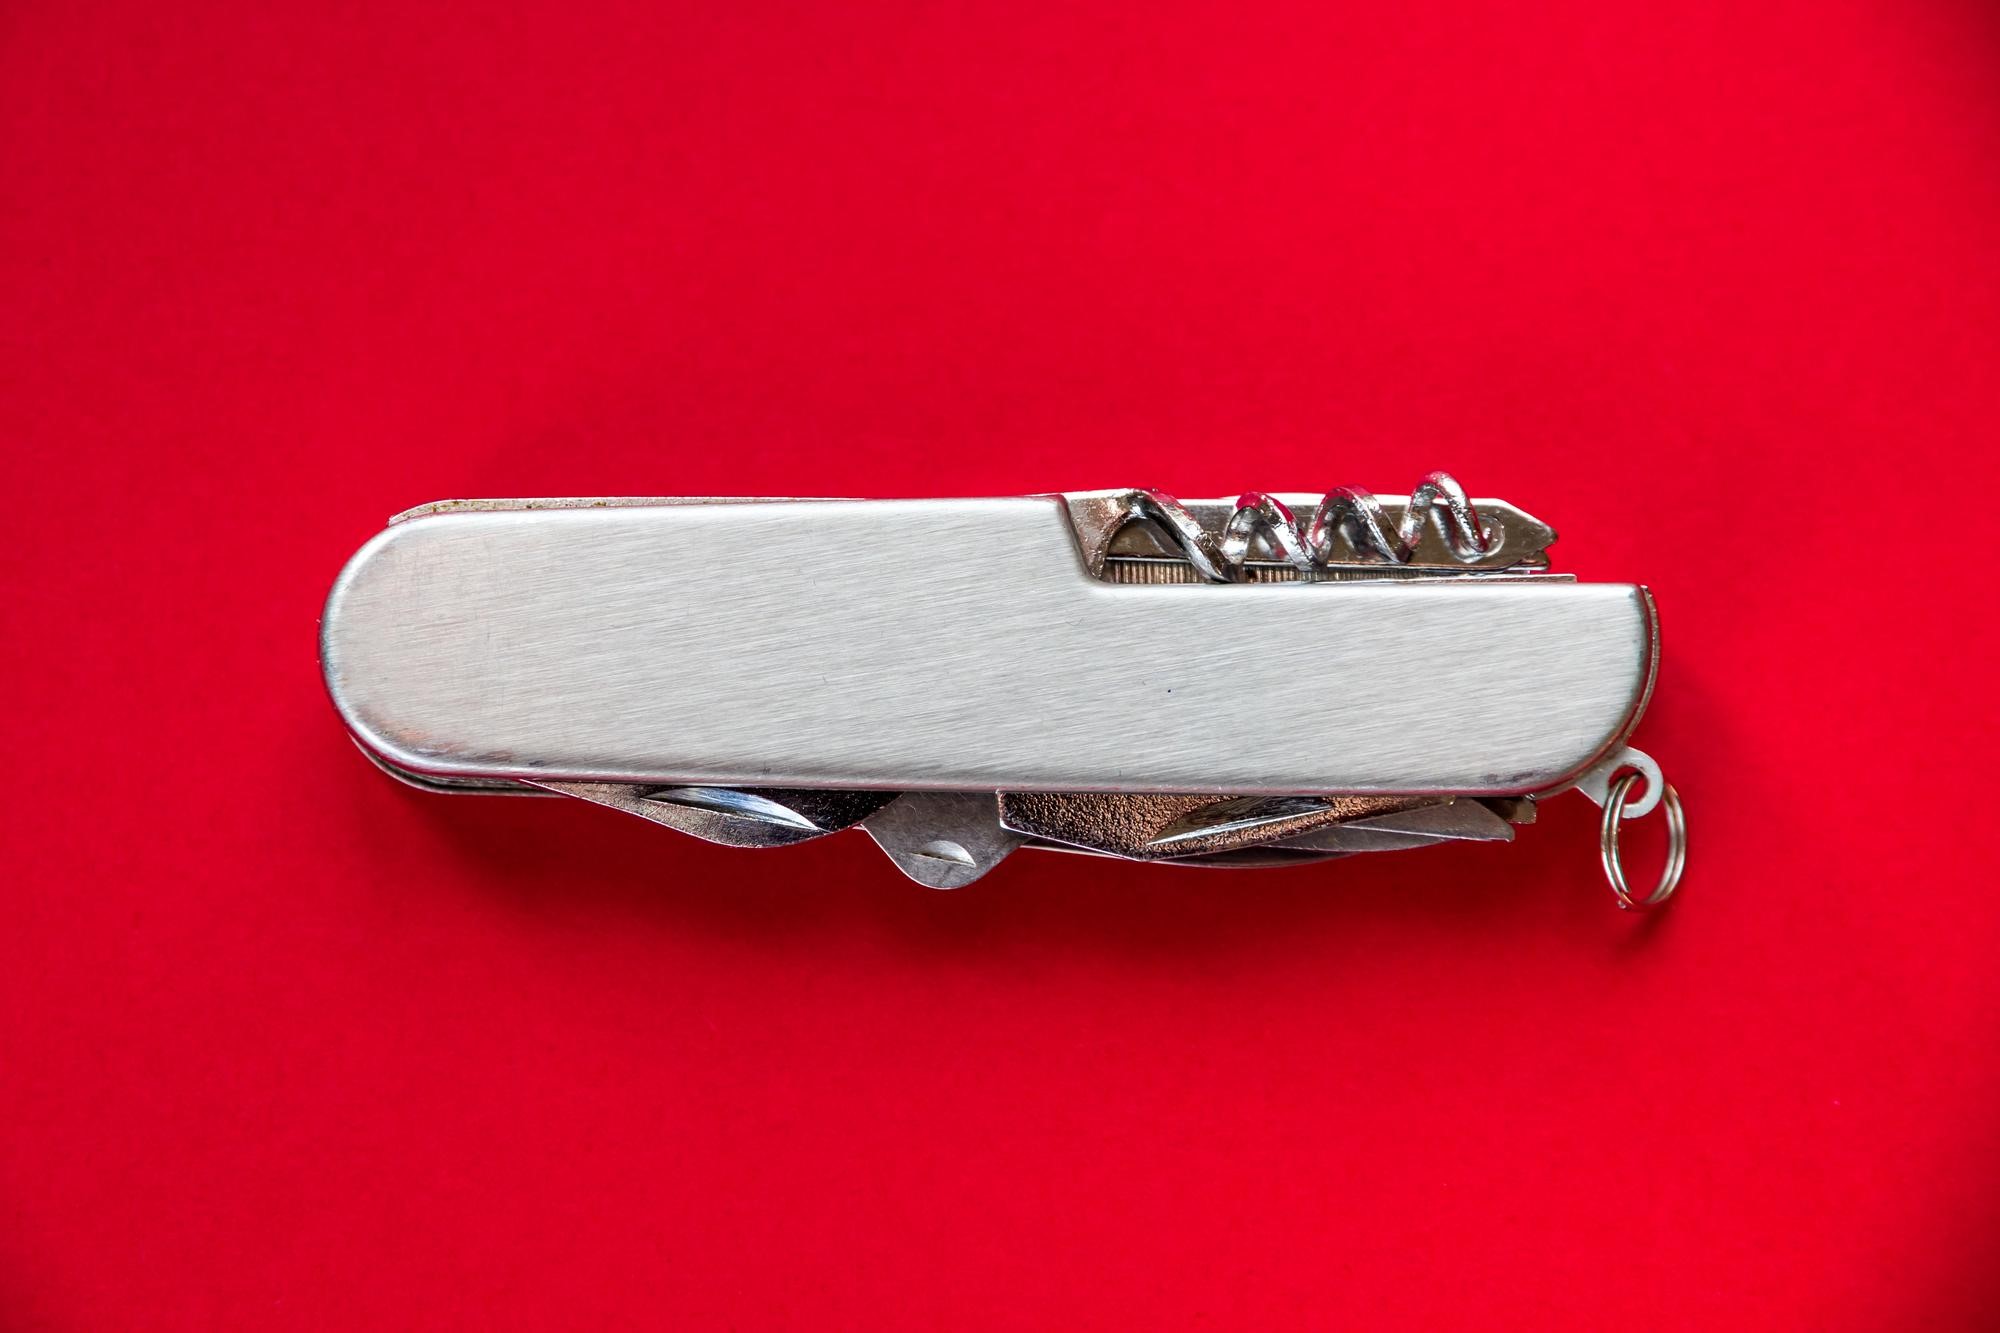 swiss army knife on a red background